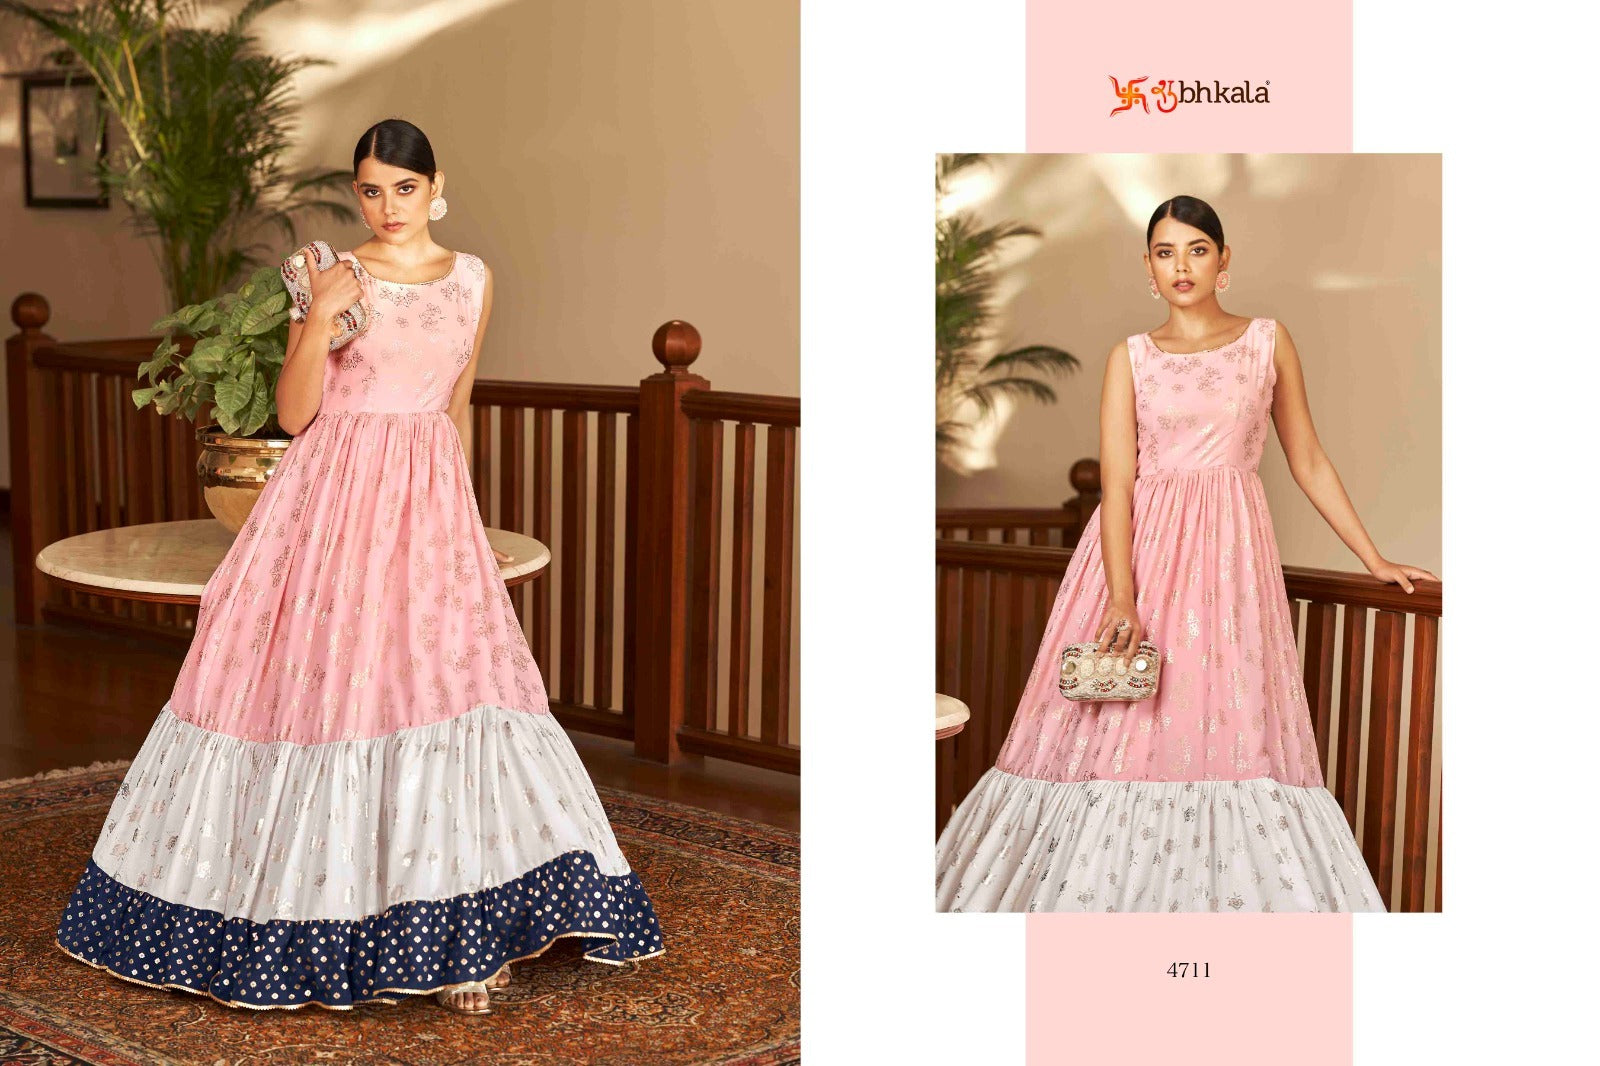 Flory Vol 18 Shubhkala Georgette One Piece Gown